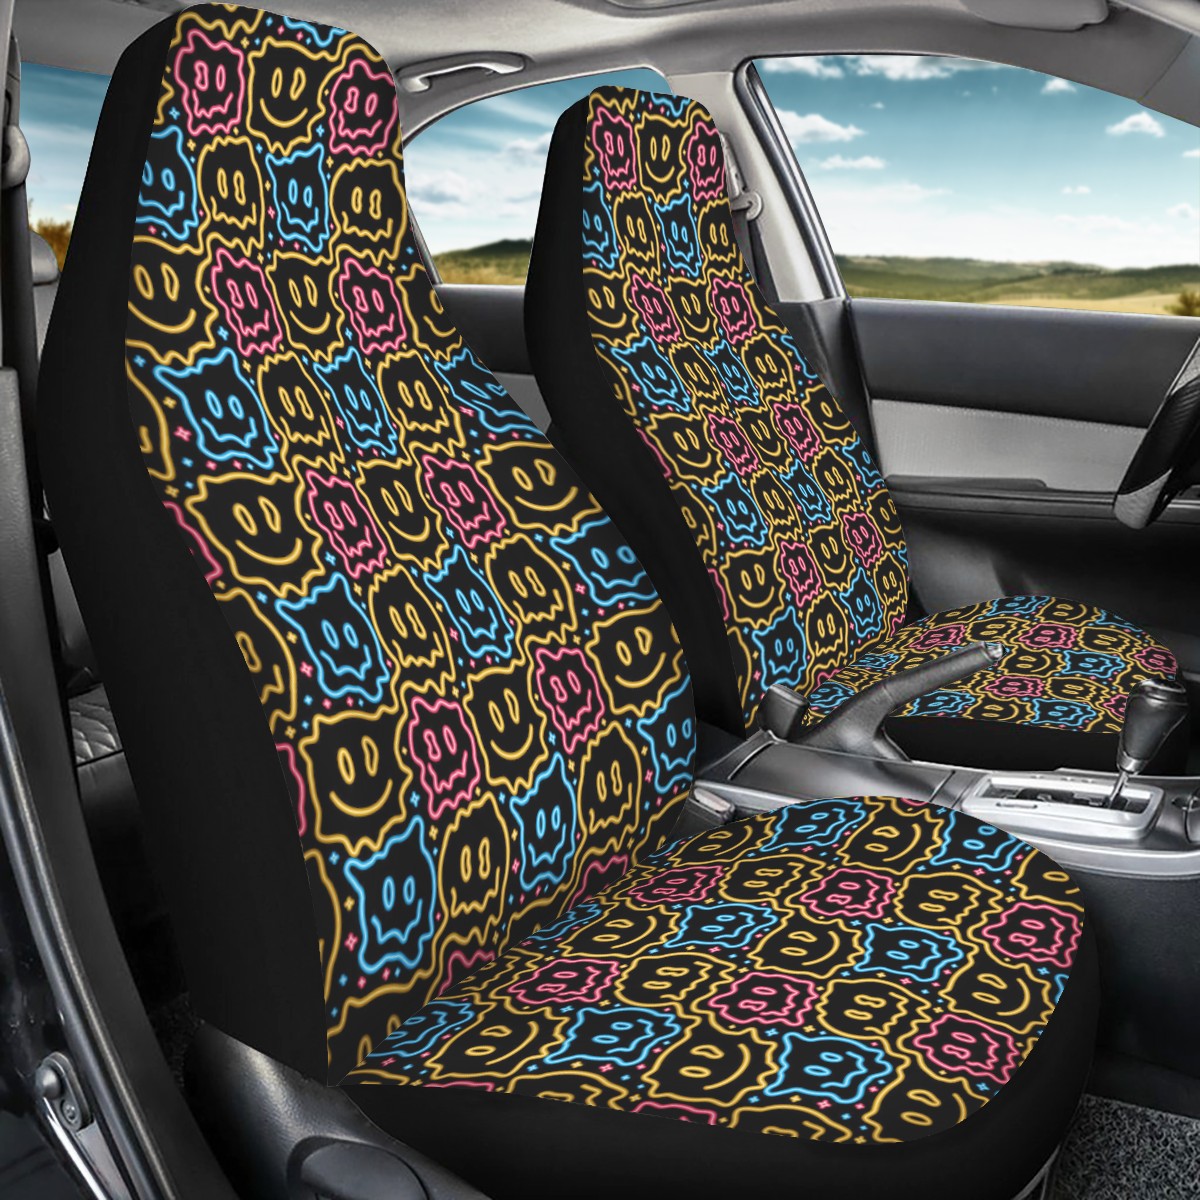 Drippy Smiley Faces Car Seat Covers